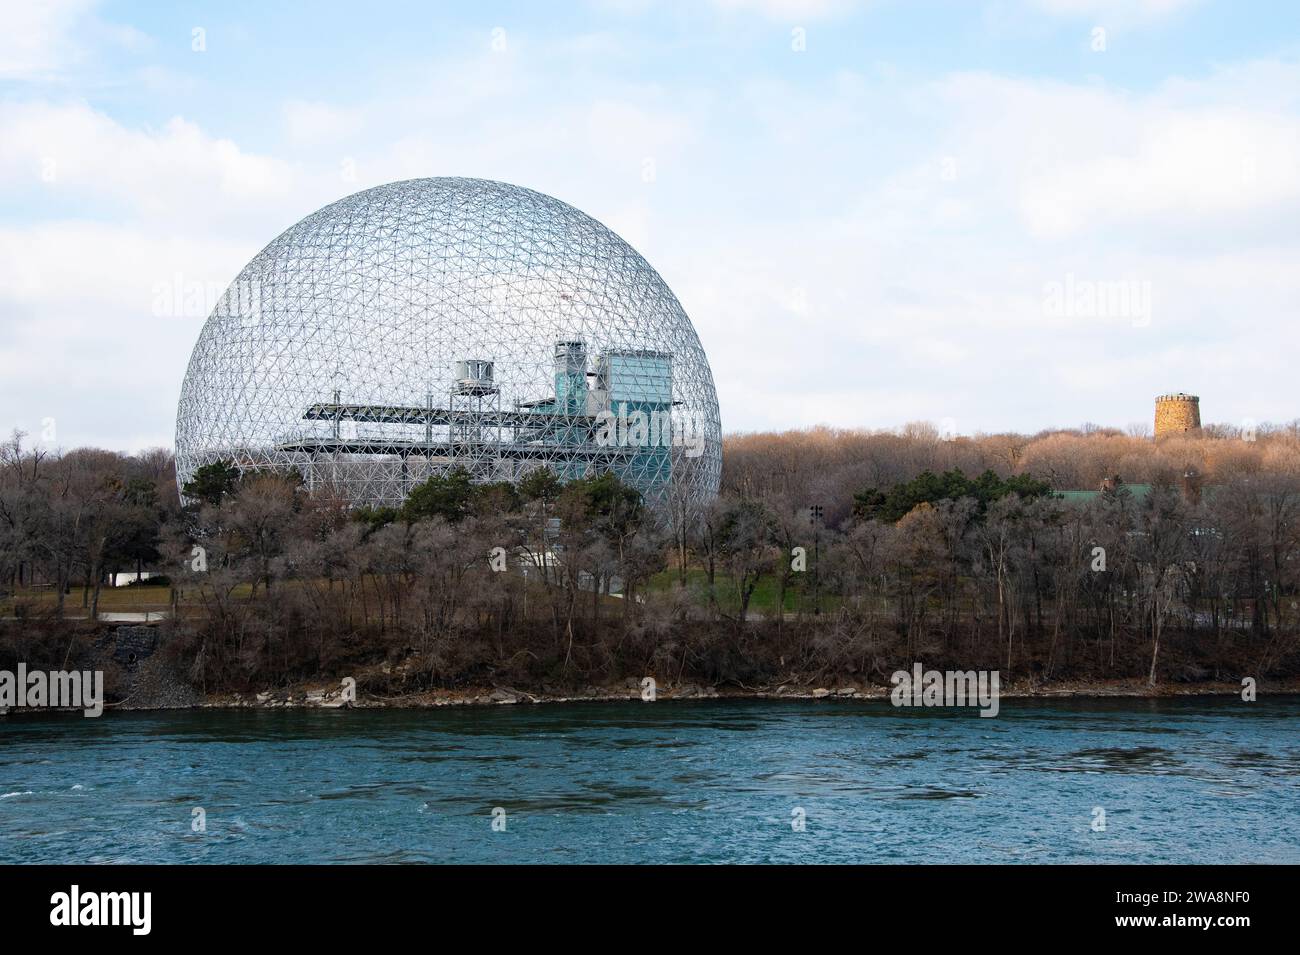 The Biosphere Environment Museum from Notre-Dame Island in Montreal, Quebec, Canada Stock Photo